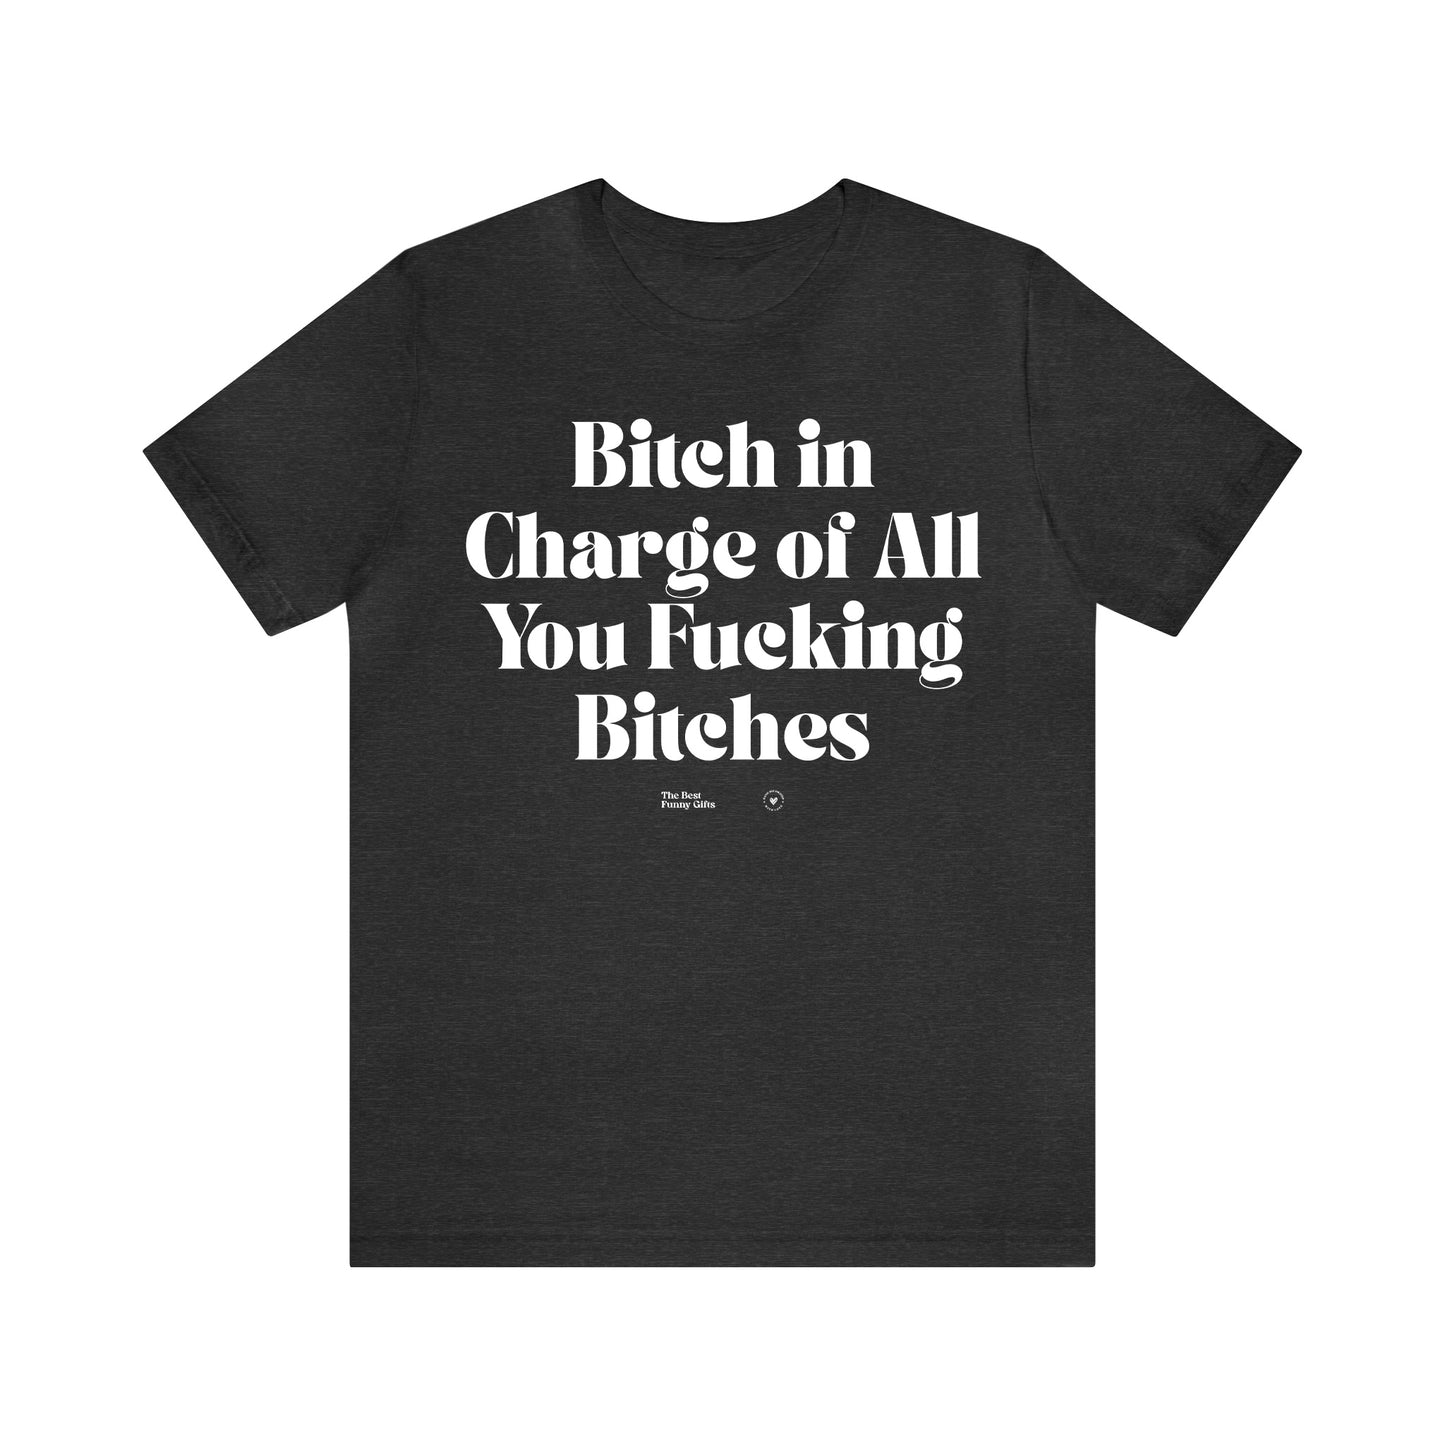 Funny Shirts for Women - Bitch in Charge of All You Fucking Bitches - Women’s T Shirts